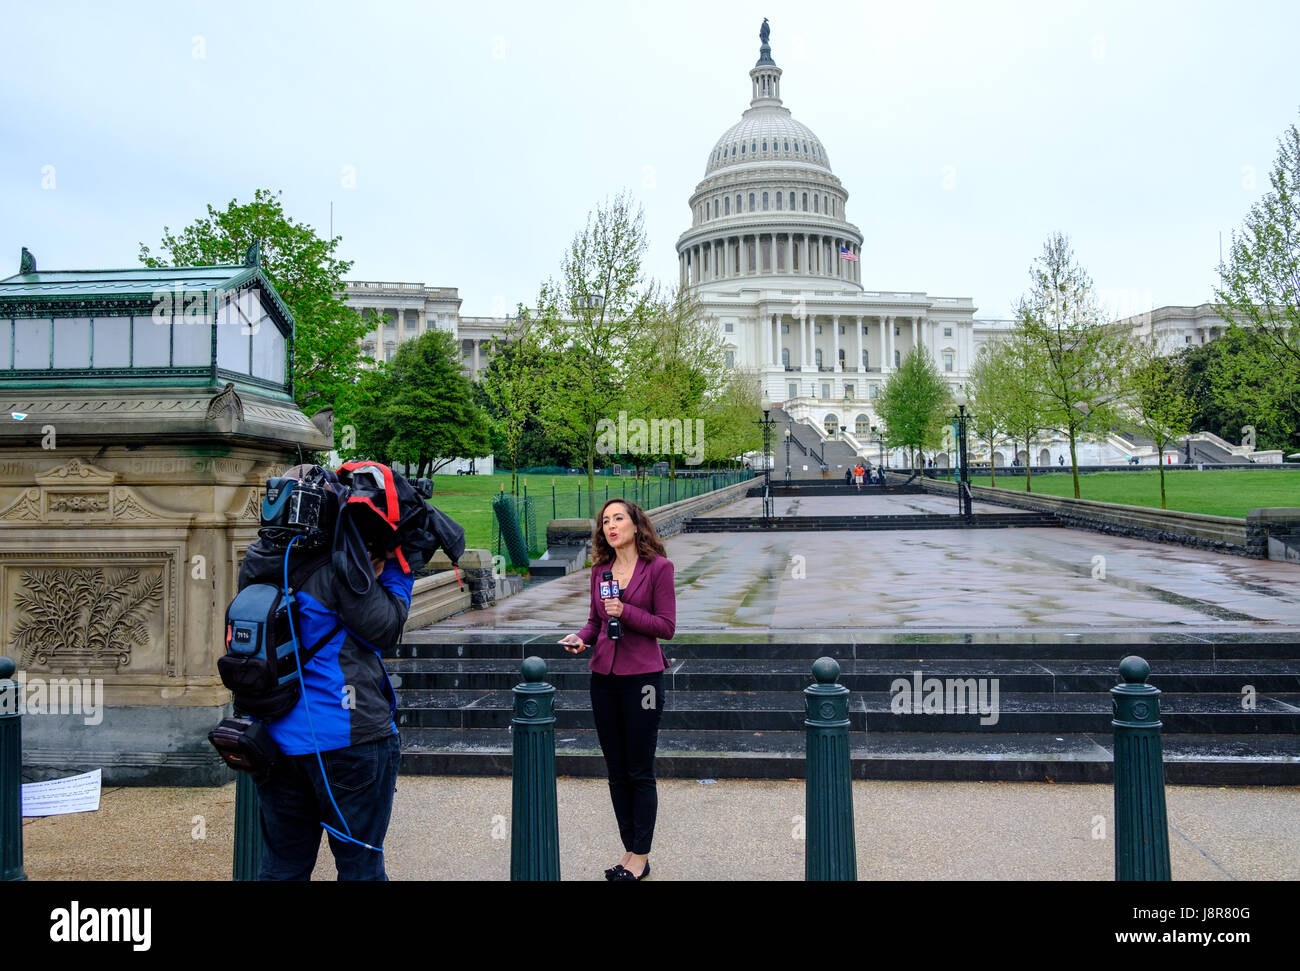 Fox News reporter broadcasting in front of the United States Capitol,  Washington DC, USA, April 22, 2017. Stock Photo